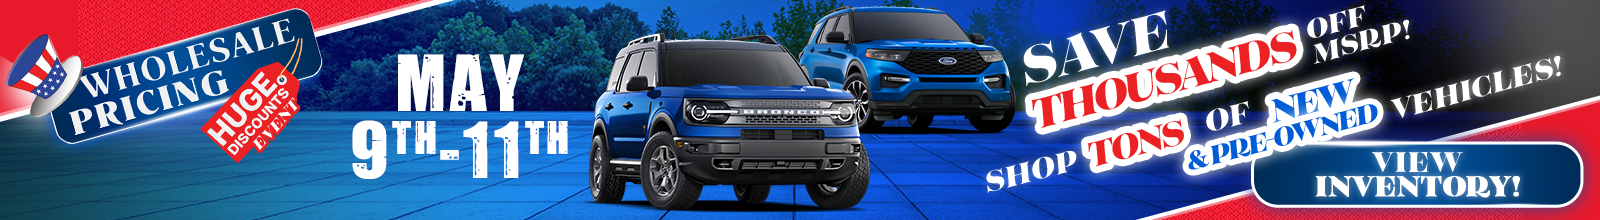 Wholesale Pricing at Schicker Ford STL